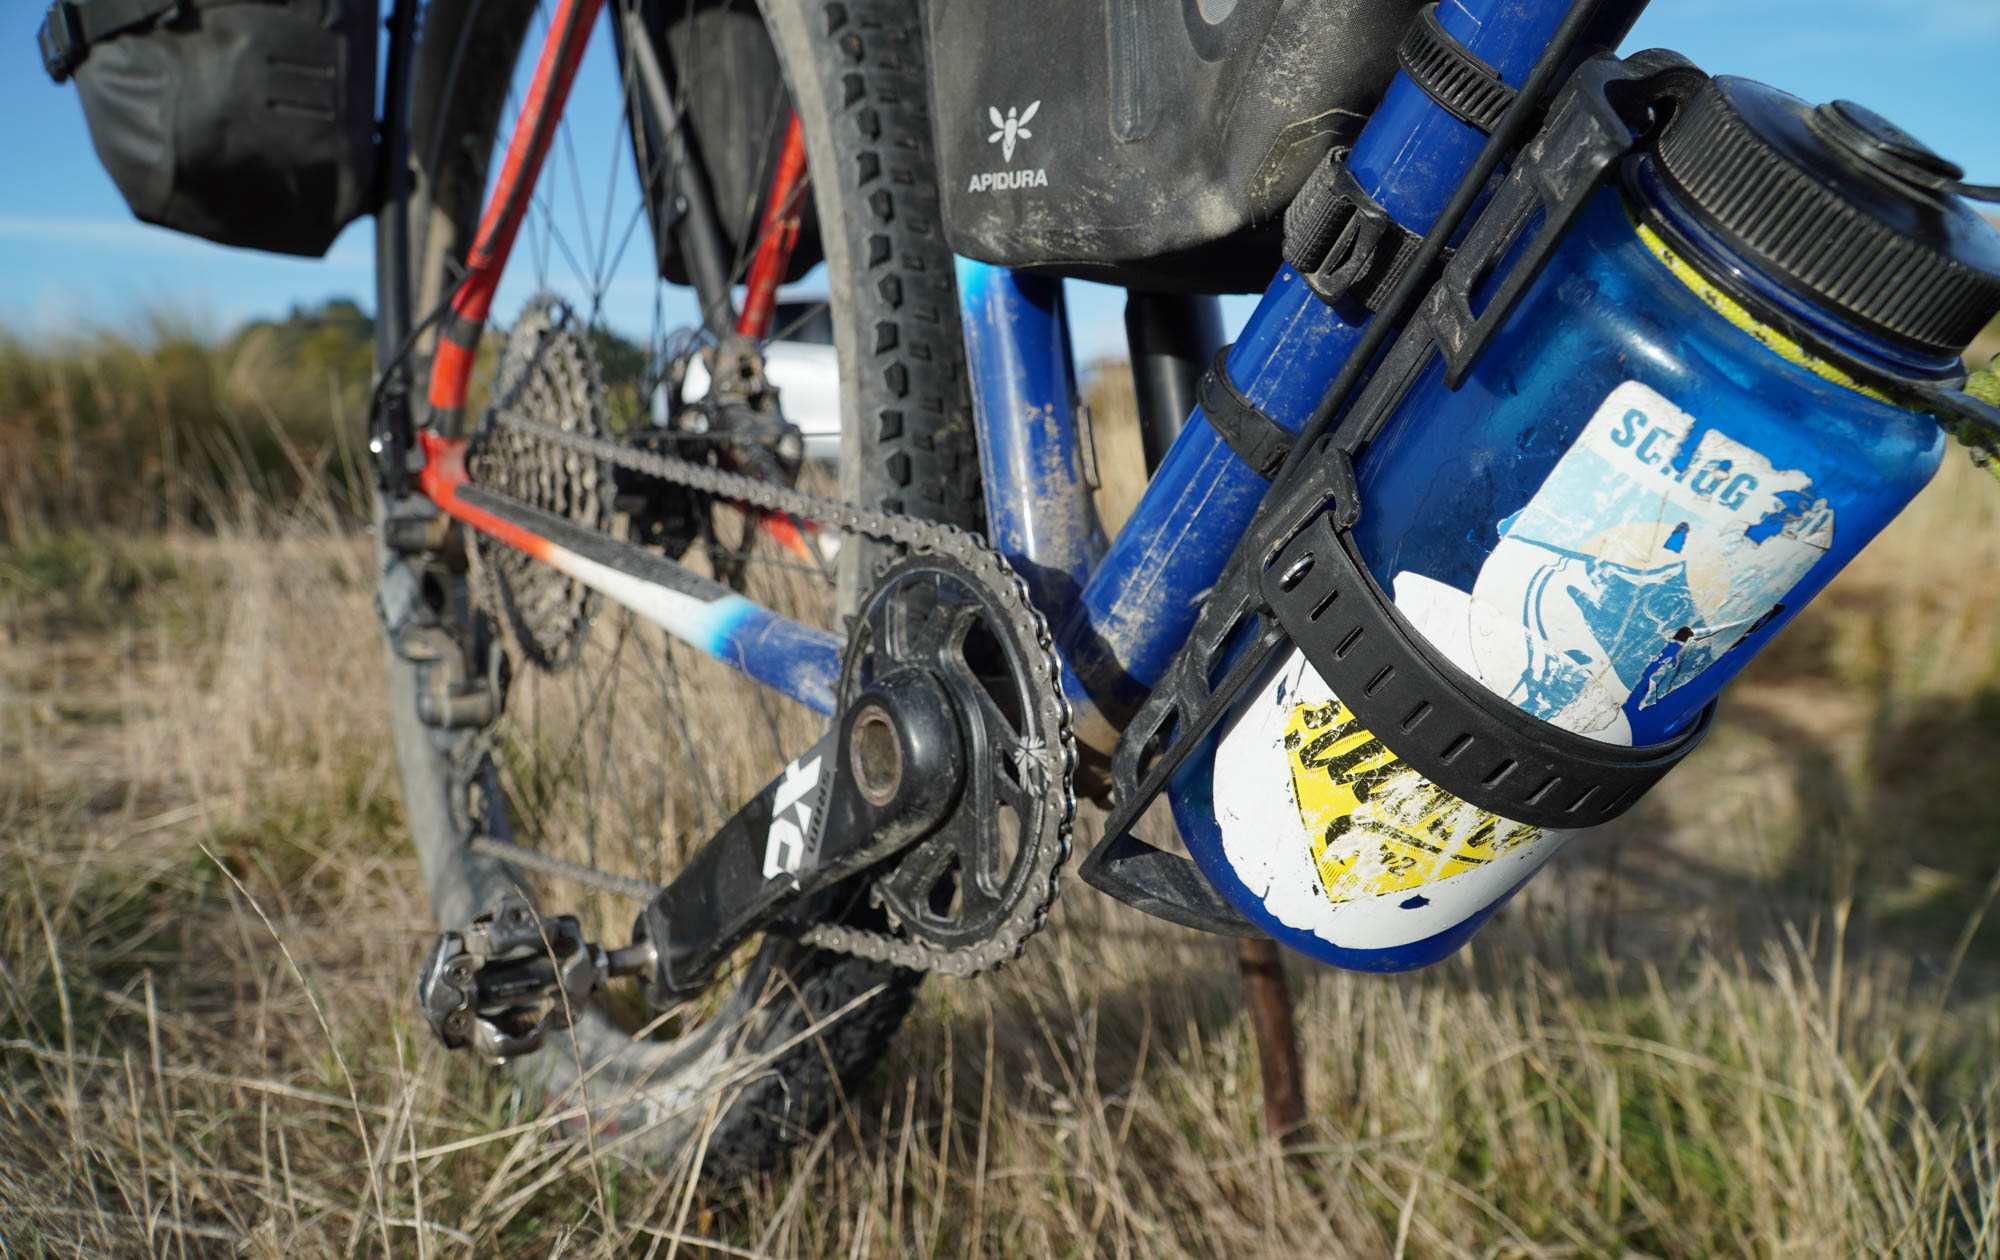 A Topeak Versacage and strap holds a battered one-liter Nalgene water bottle under the downtube. The bottle has several faded and illegible stickers on it.